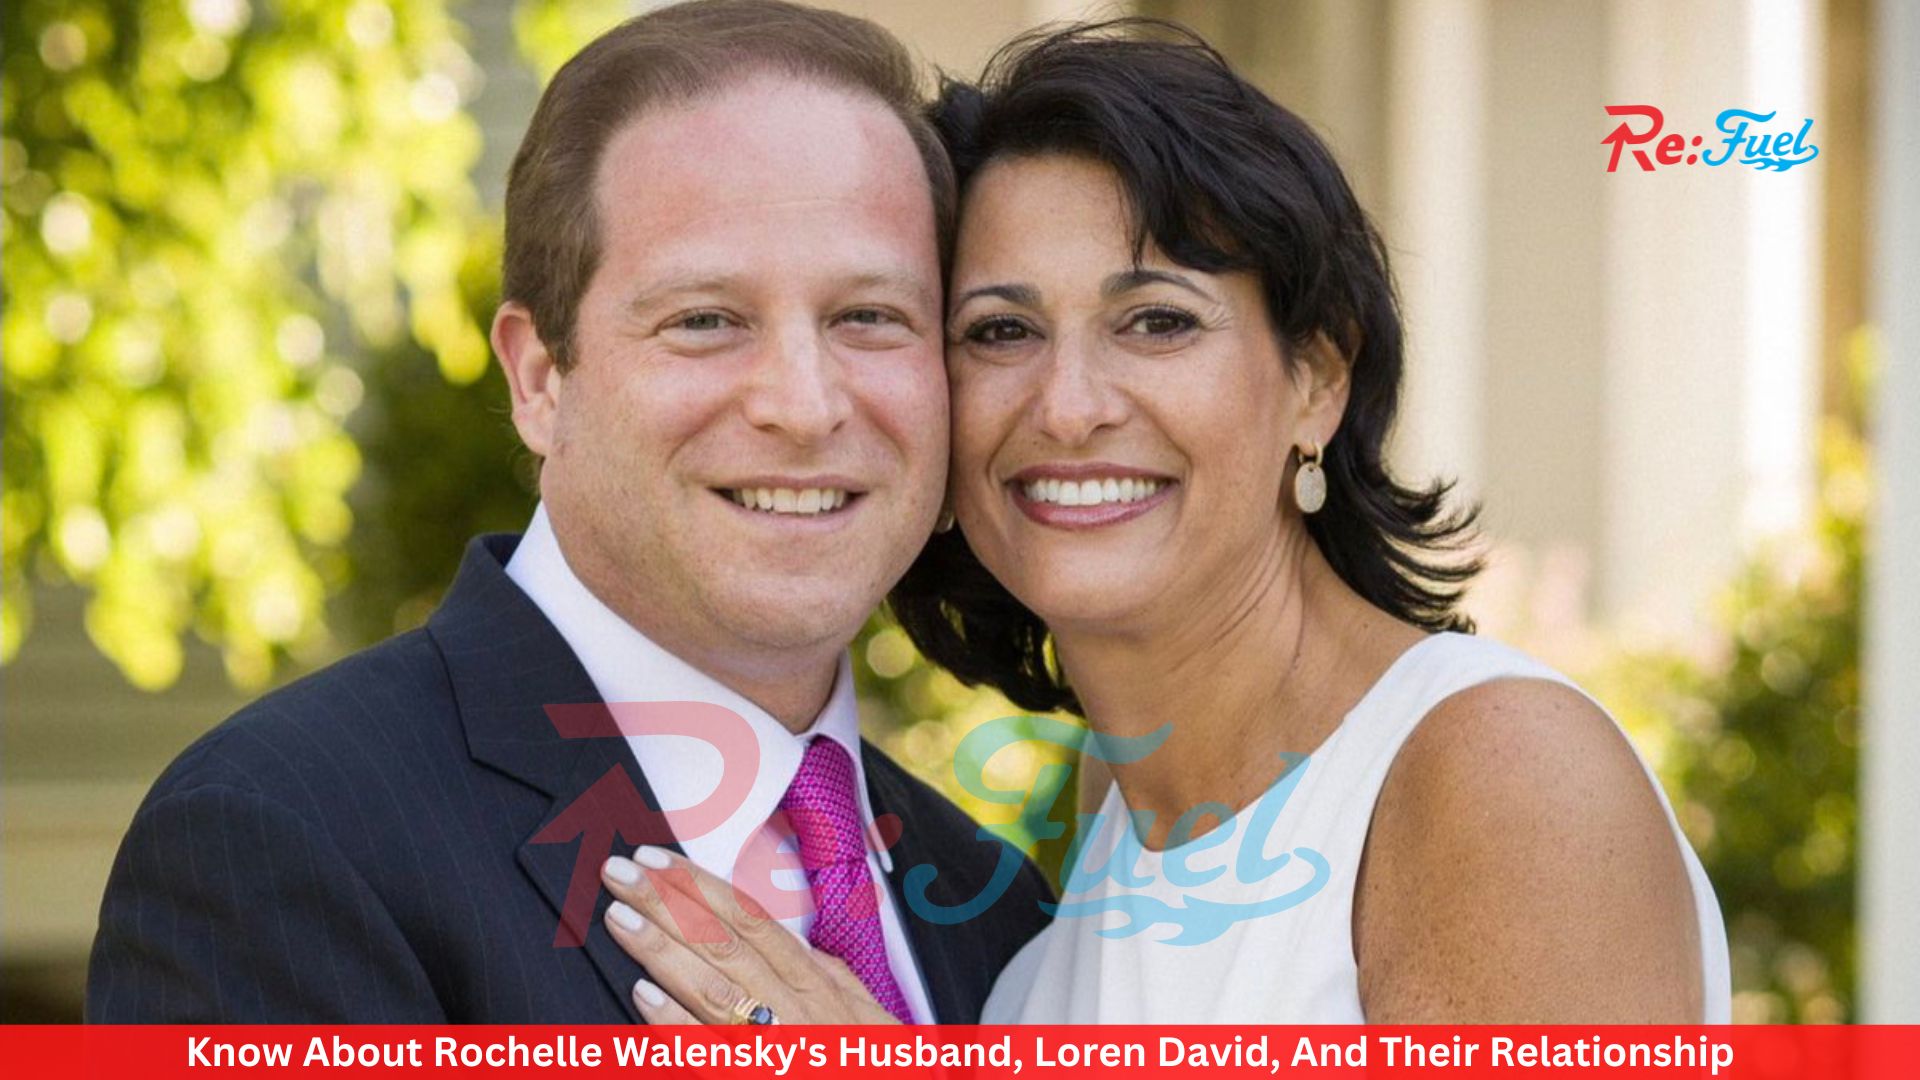 Know About Rochelle Walensky's Husband, Loren David, And Their Relationship